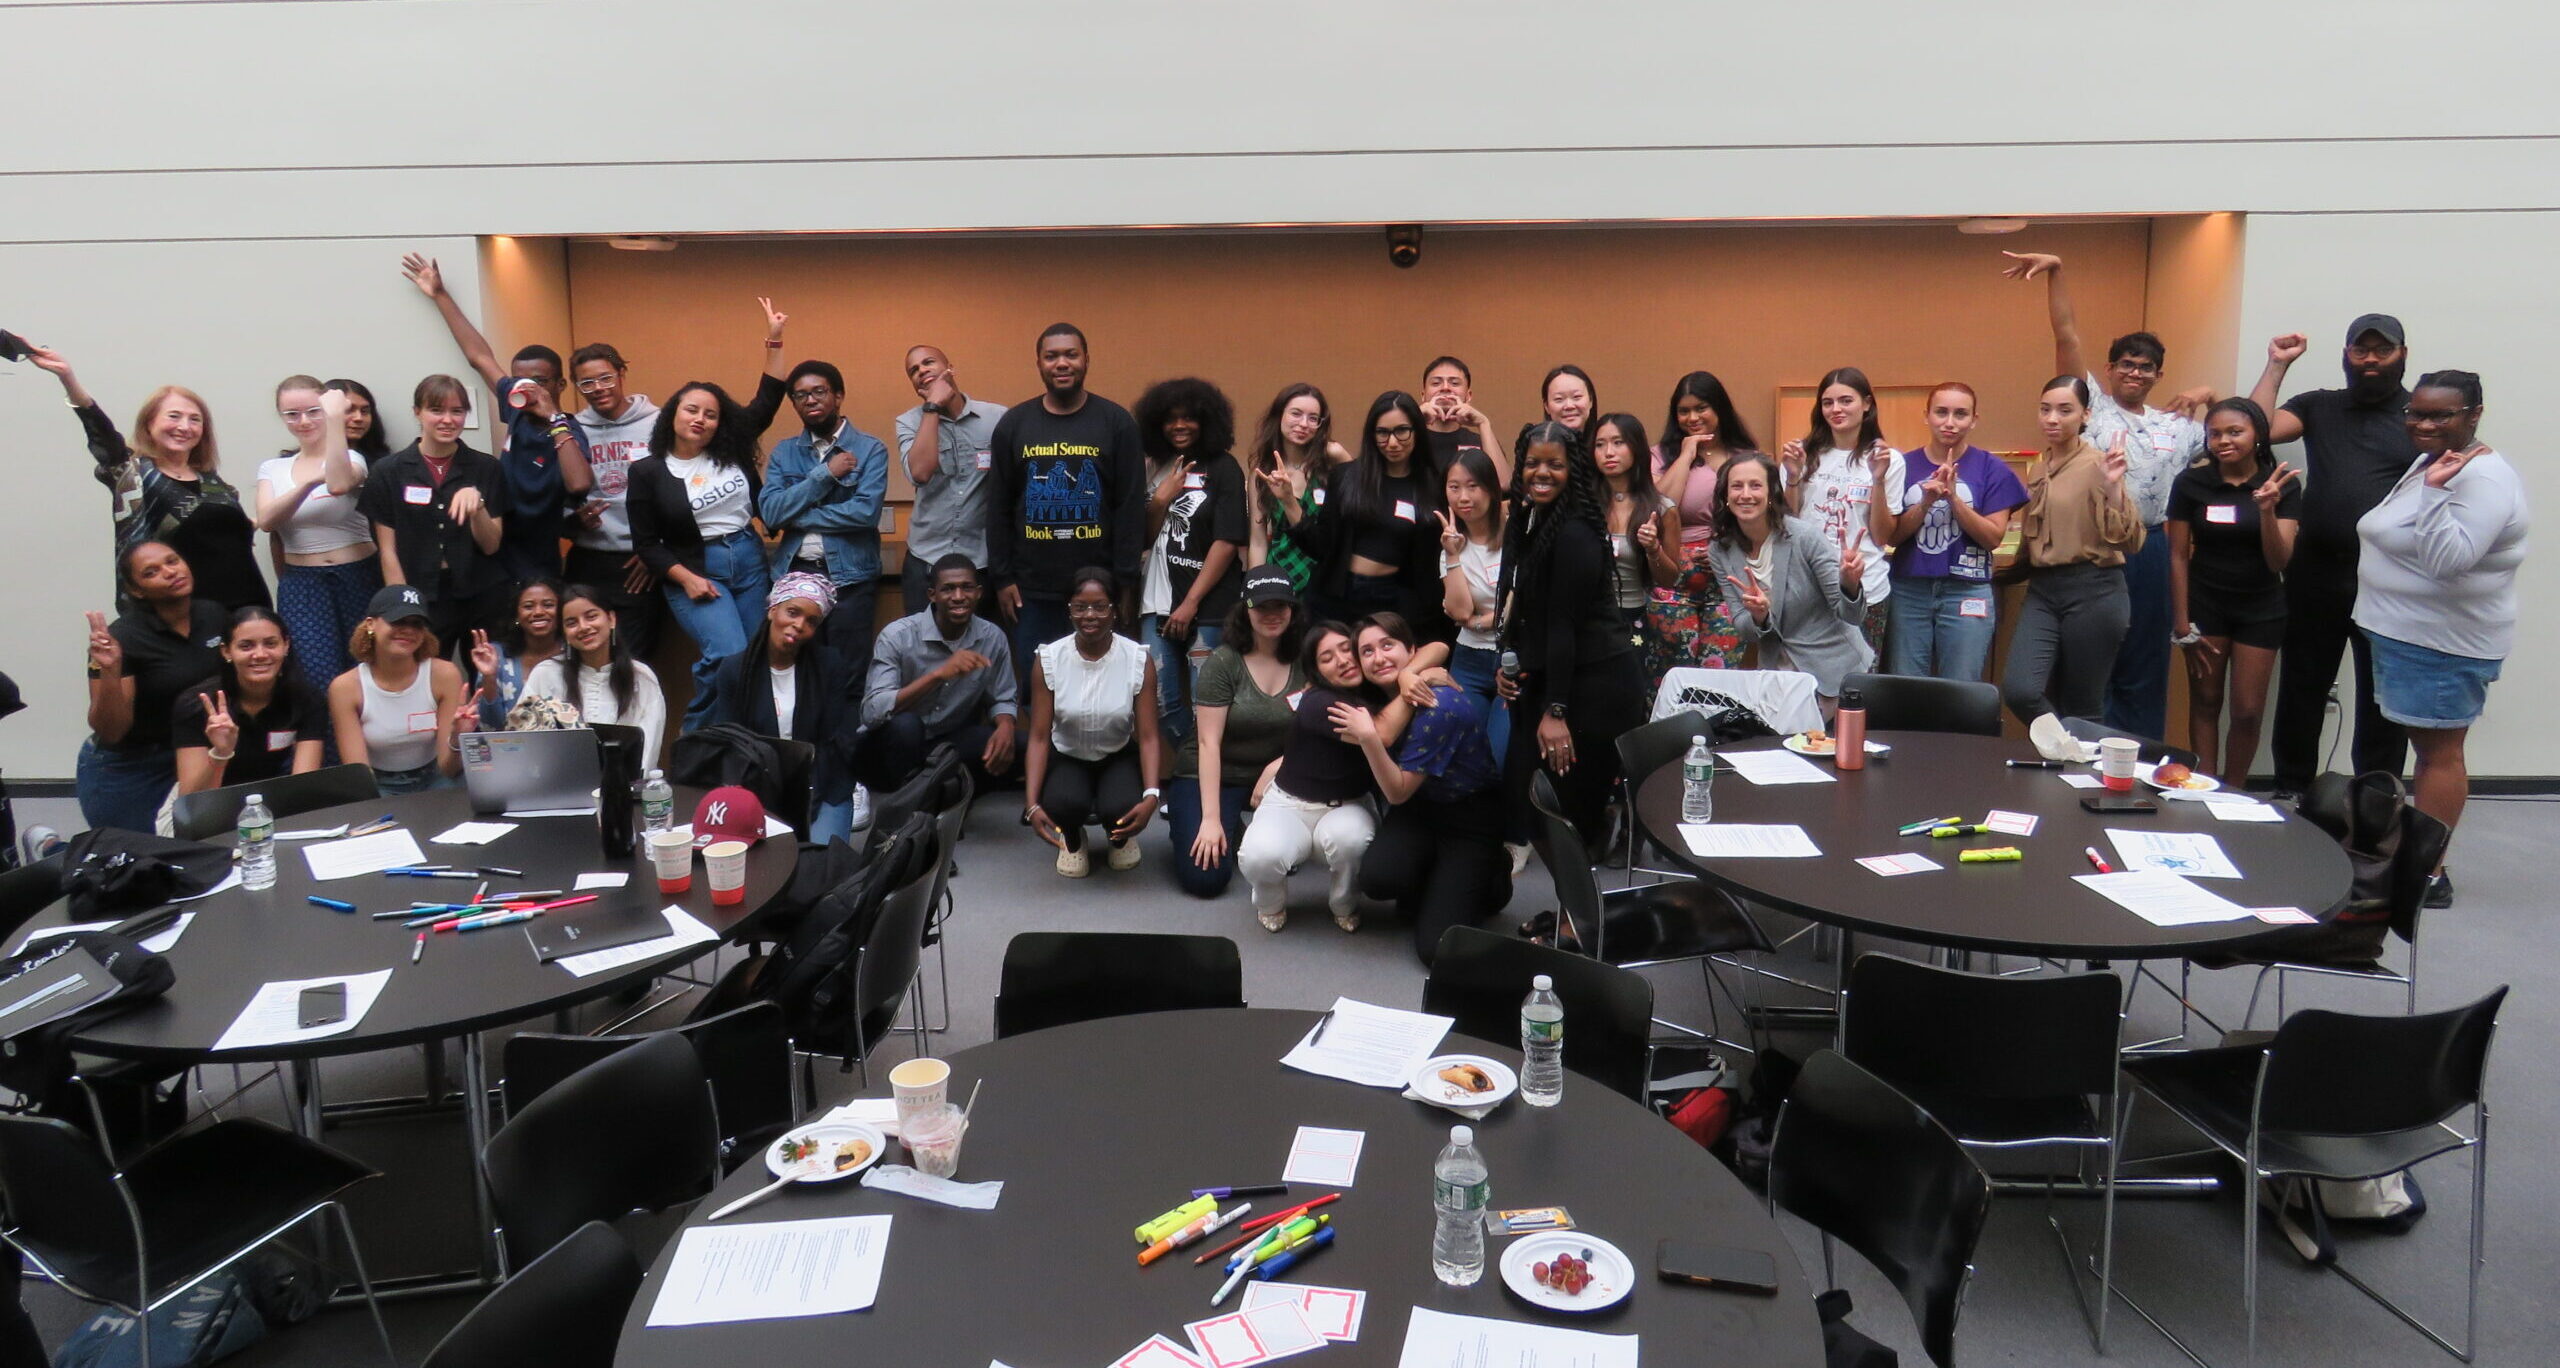 Starting an Inspiring Year with the CUNY Peer Leaders